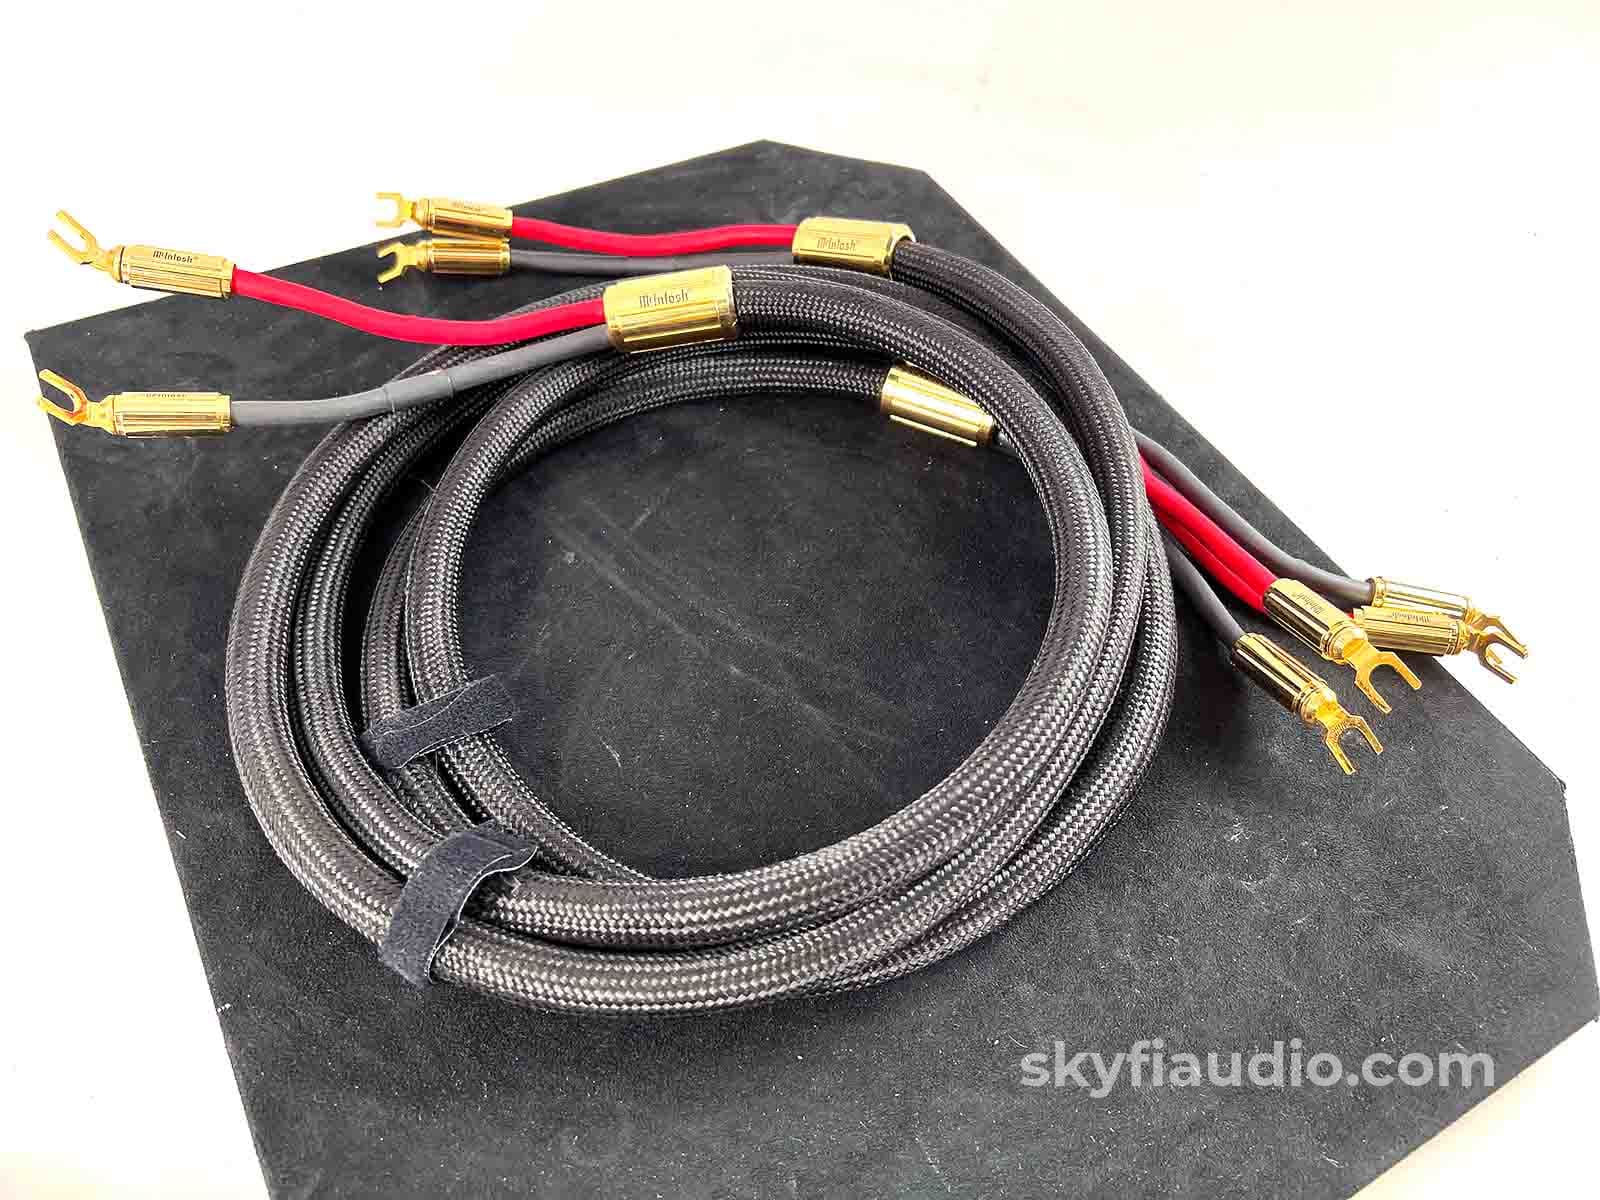 Mcintosh Speaker Cables W/Single Spades - 2M In Store Only